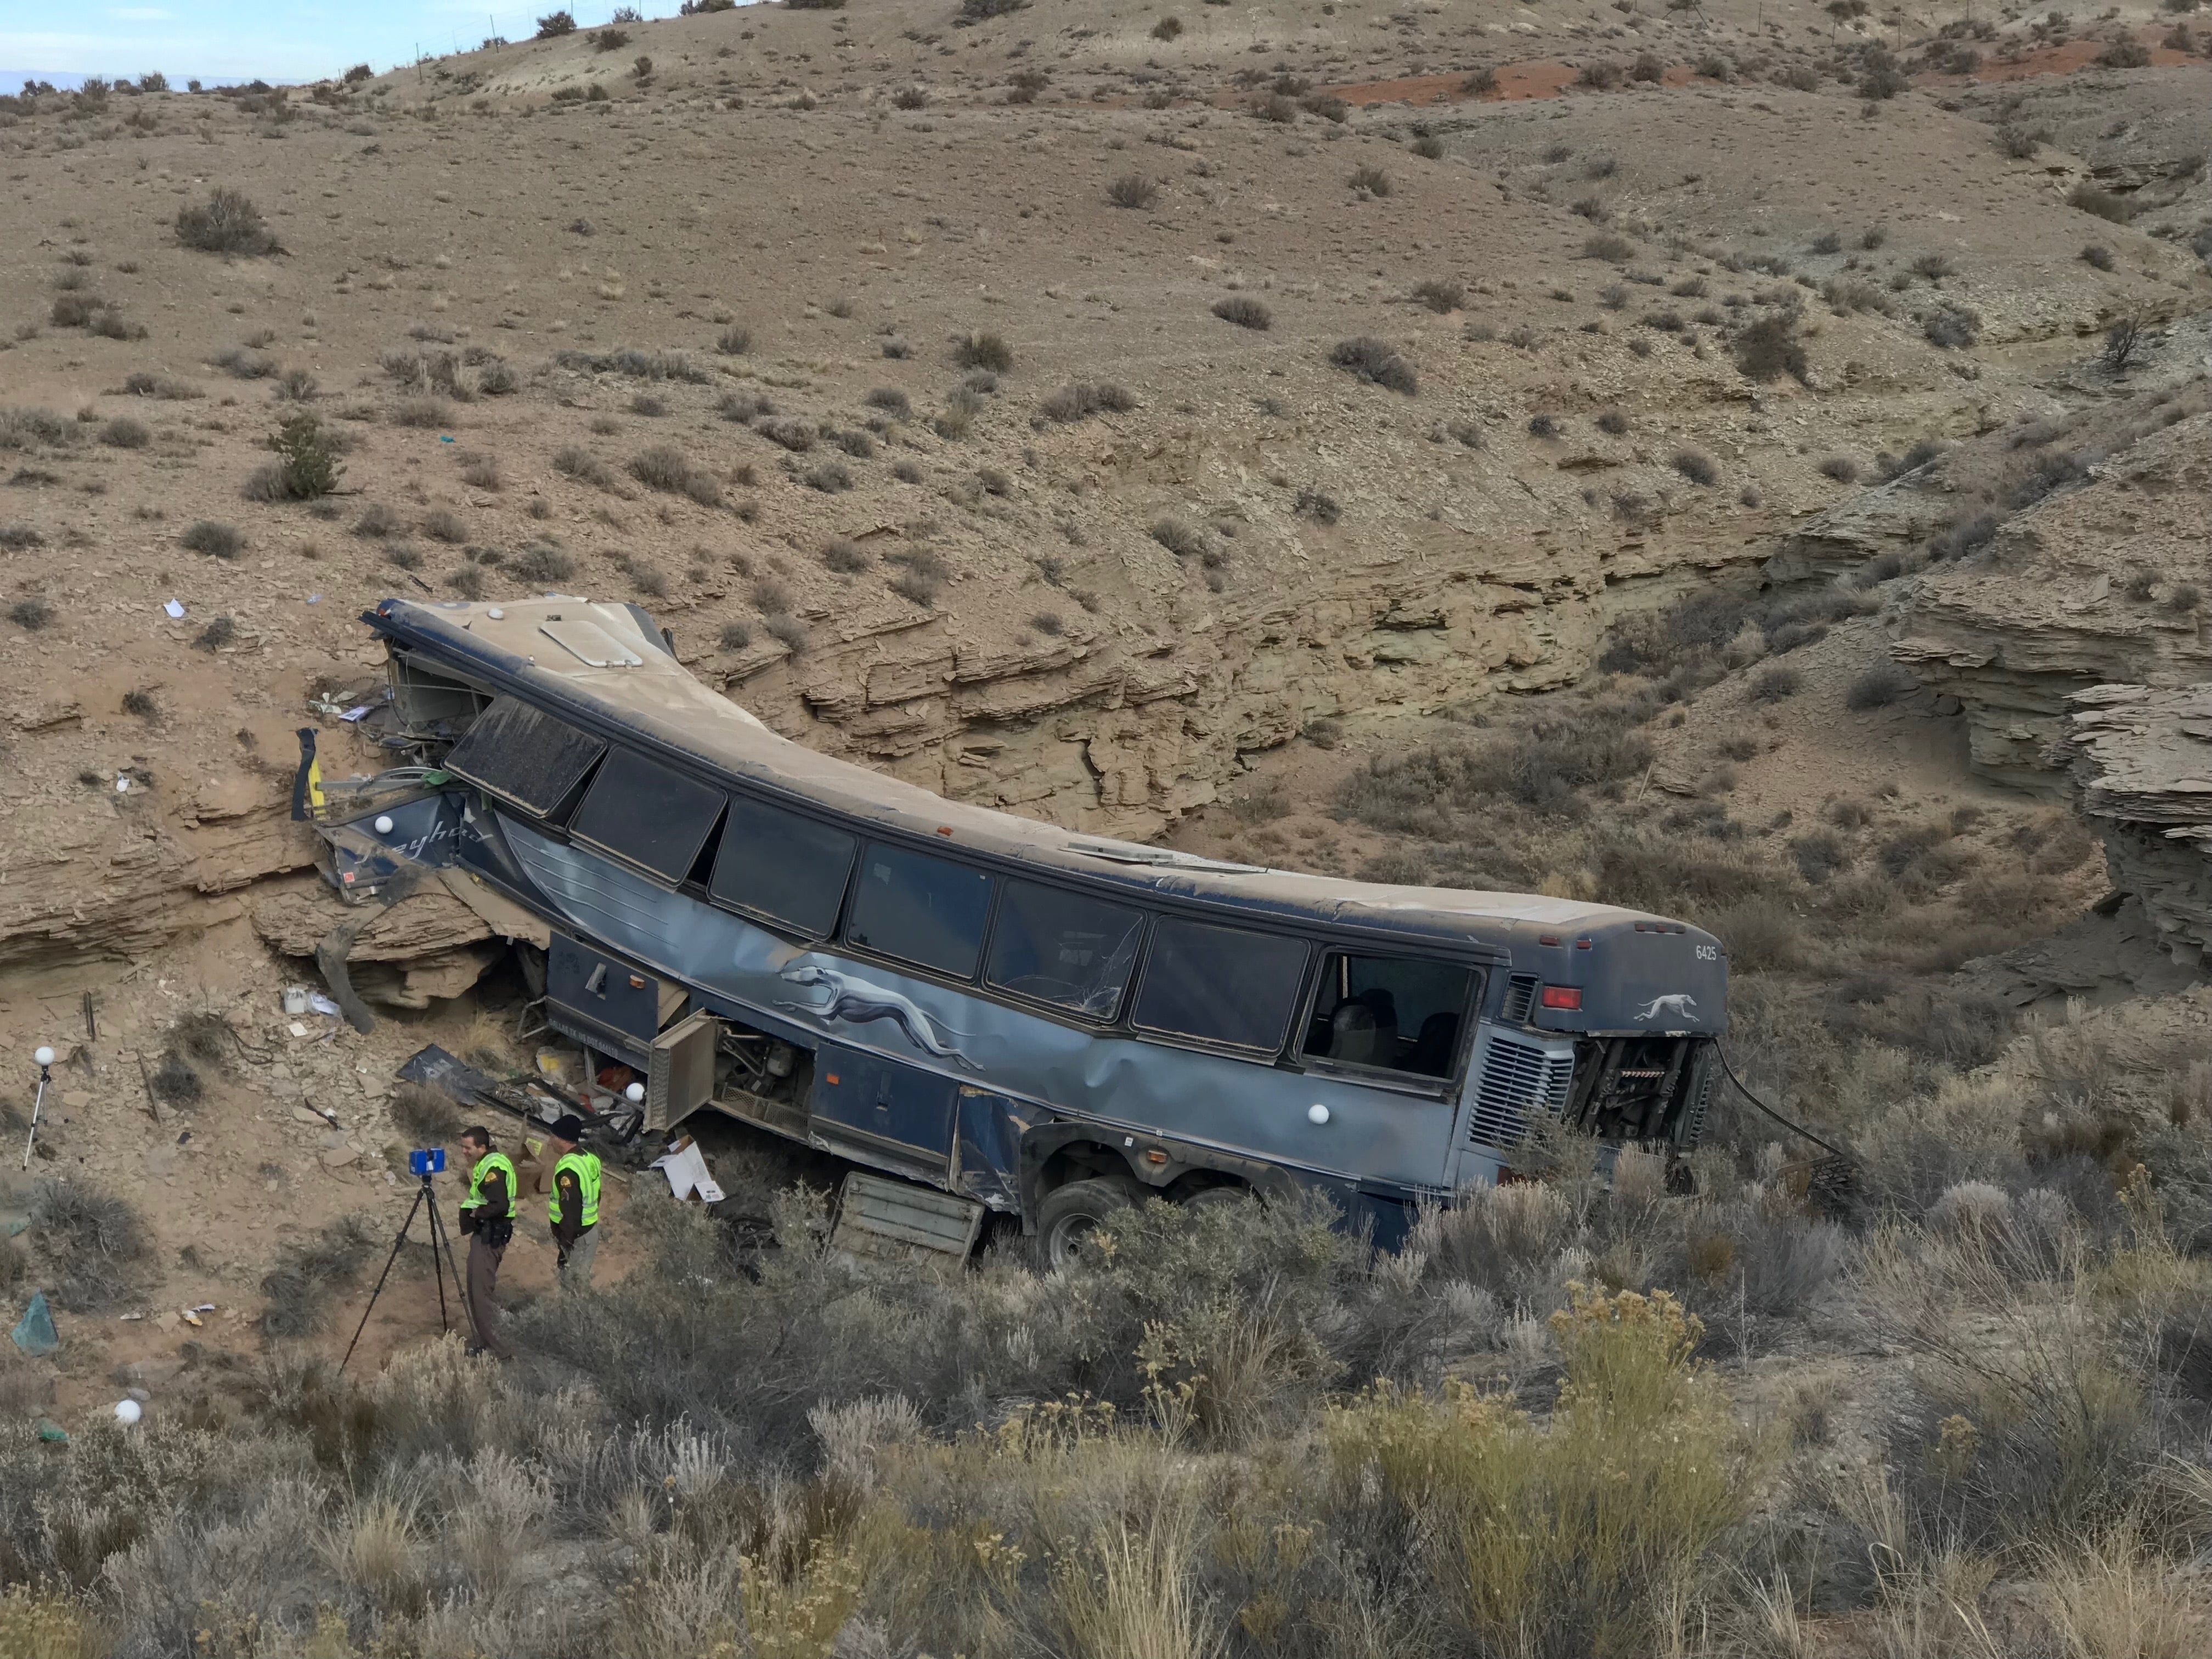 FILE - This Jan. 1, 2018, file photo, shows the aftermath of a Greyhound bus crash in Emery County, Utah. A man who suffered serious injuries when a Greyhound bus careened off a road in the Utah desert has sued the driver and the company, saying the driver was tired and sick and shouldn't have behind the wheel in a 2017 crash that killed one person and injured 12 others. Michael Edwards of Georgia says in the lawsuit filed Monday, May 13, 2019, in Nevada that Charles E. Saunders fell asleep after taking cold medicine and never hit the brakes as the bus flew off the highway and crashed into a canyon wall about 300 miles (483 kilometers) south of Salt Lake City.